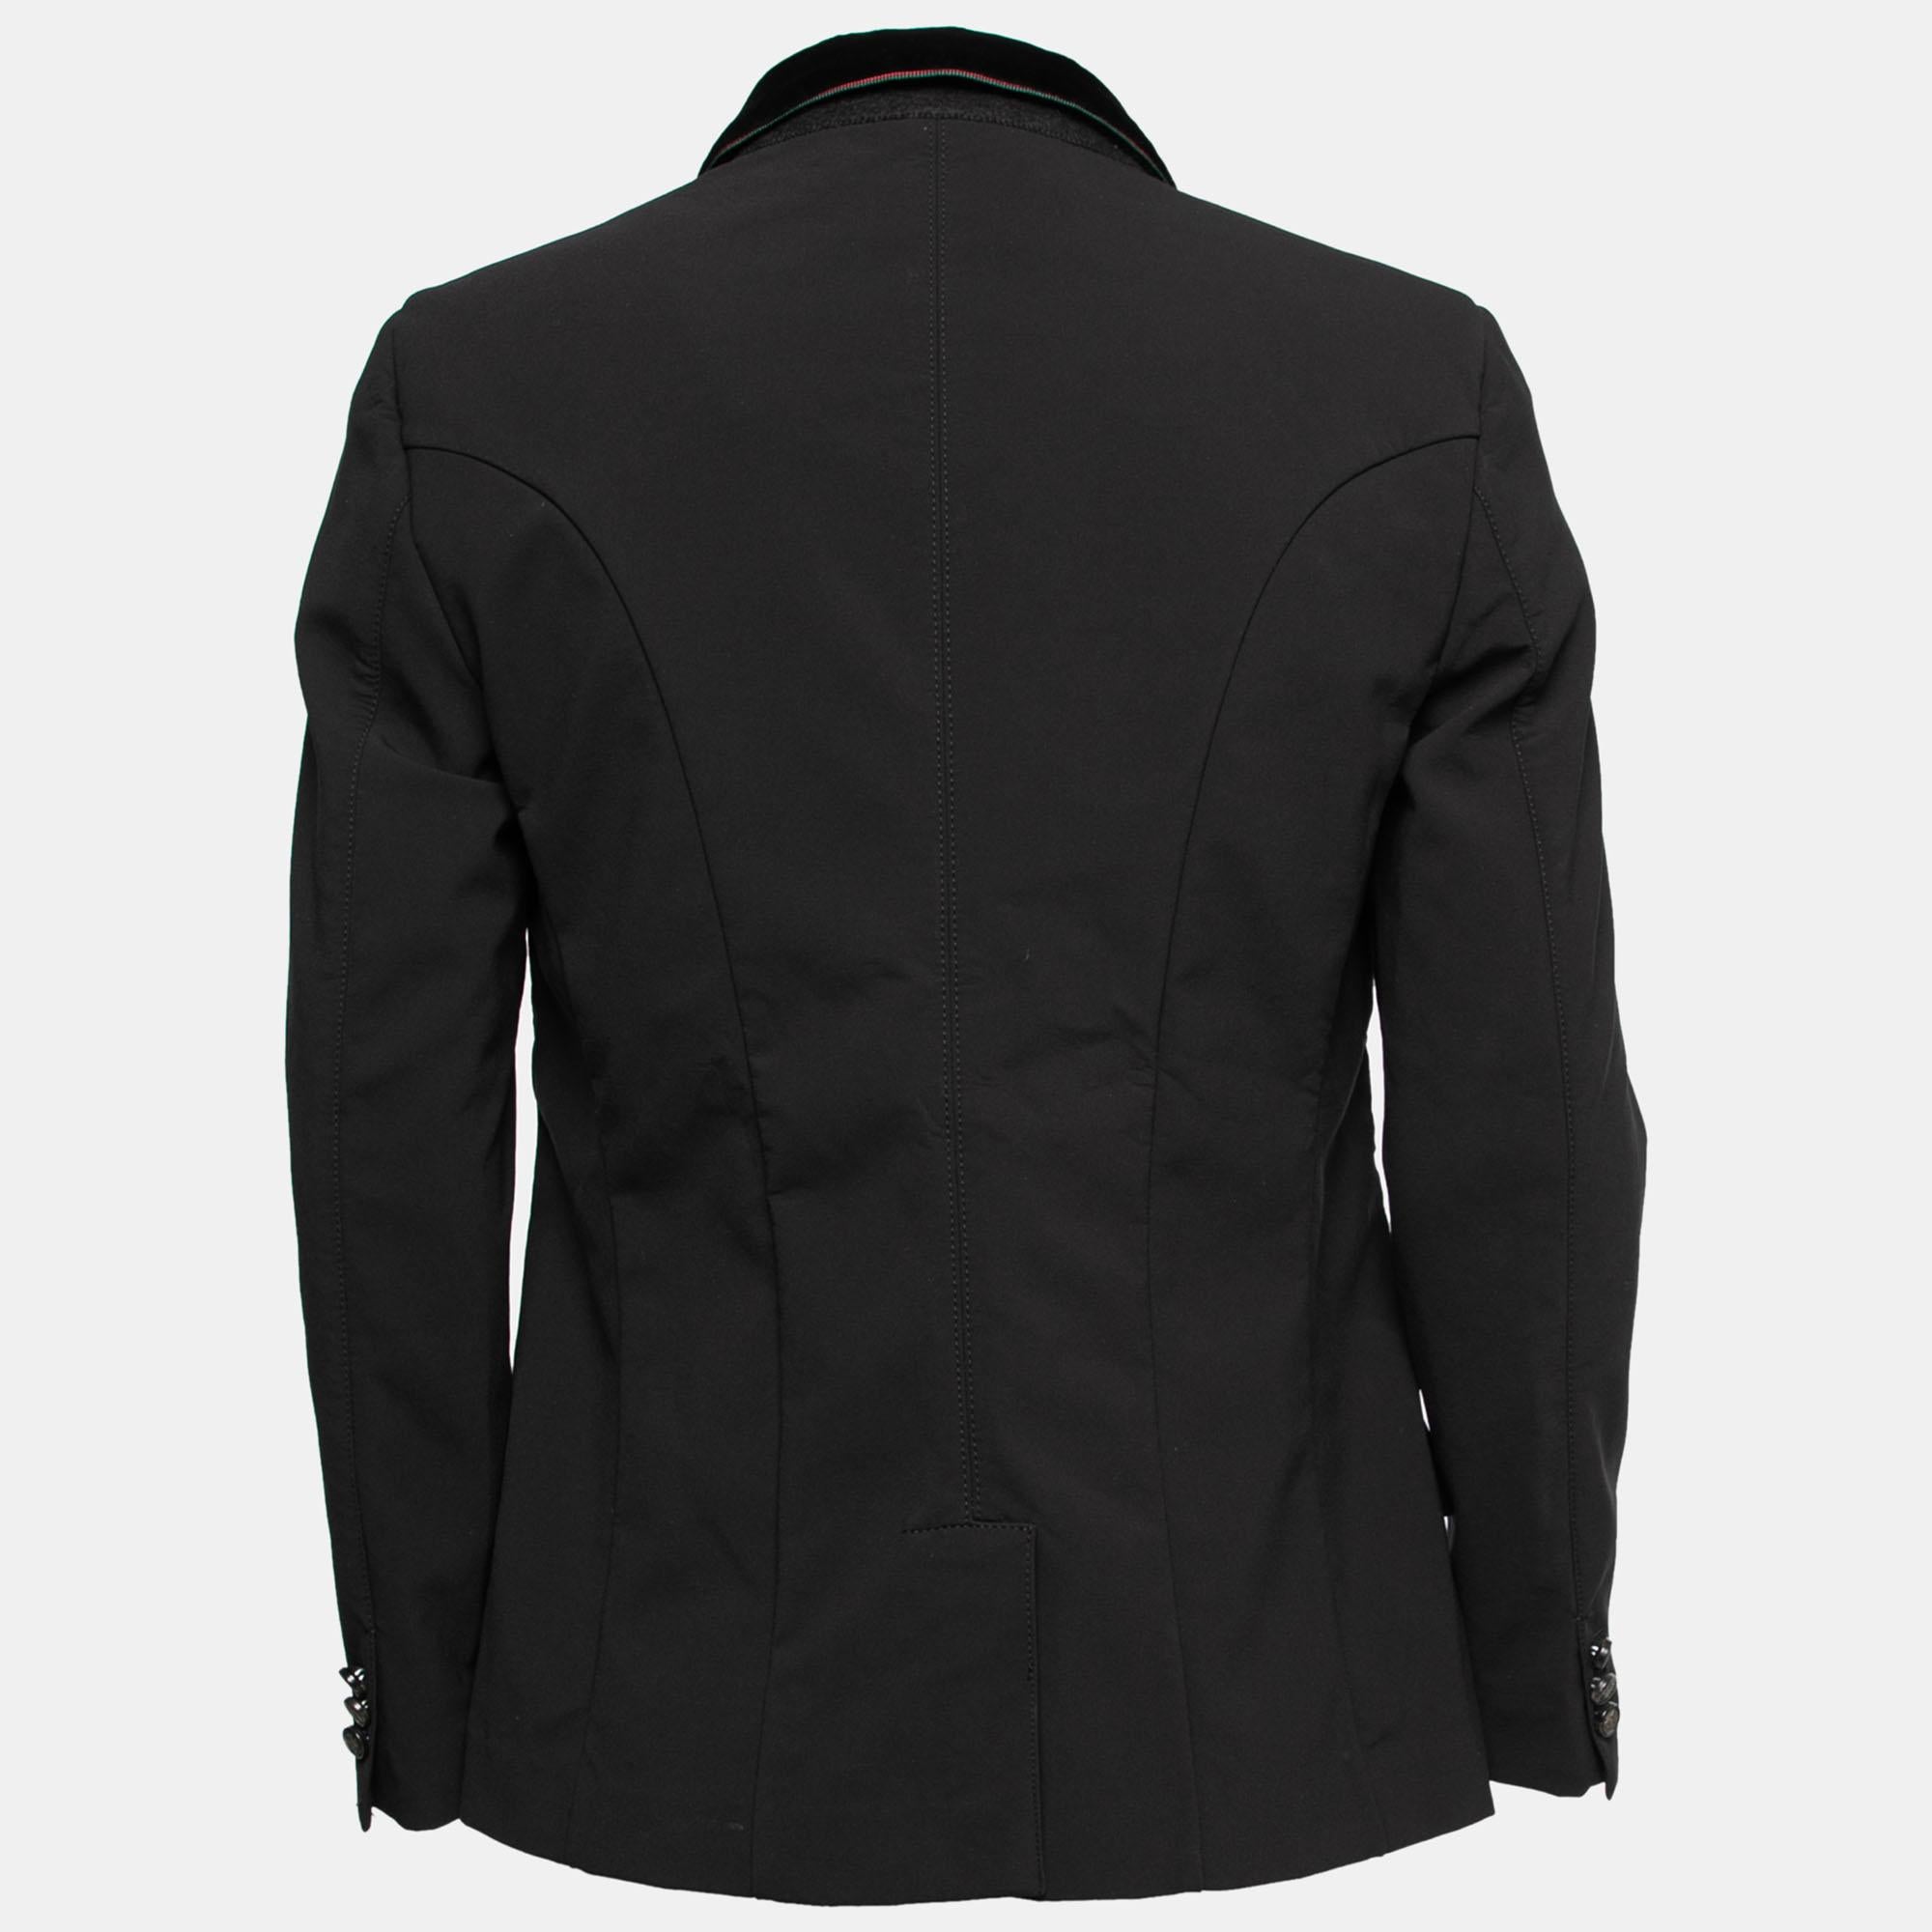 The chic logo embroidery on the side pocket of this Gucci blazer offers instant brand identification. Created from a mix of quality fabrics, it is complemented with front button fastenings, three external pockets, and long sleeves with button